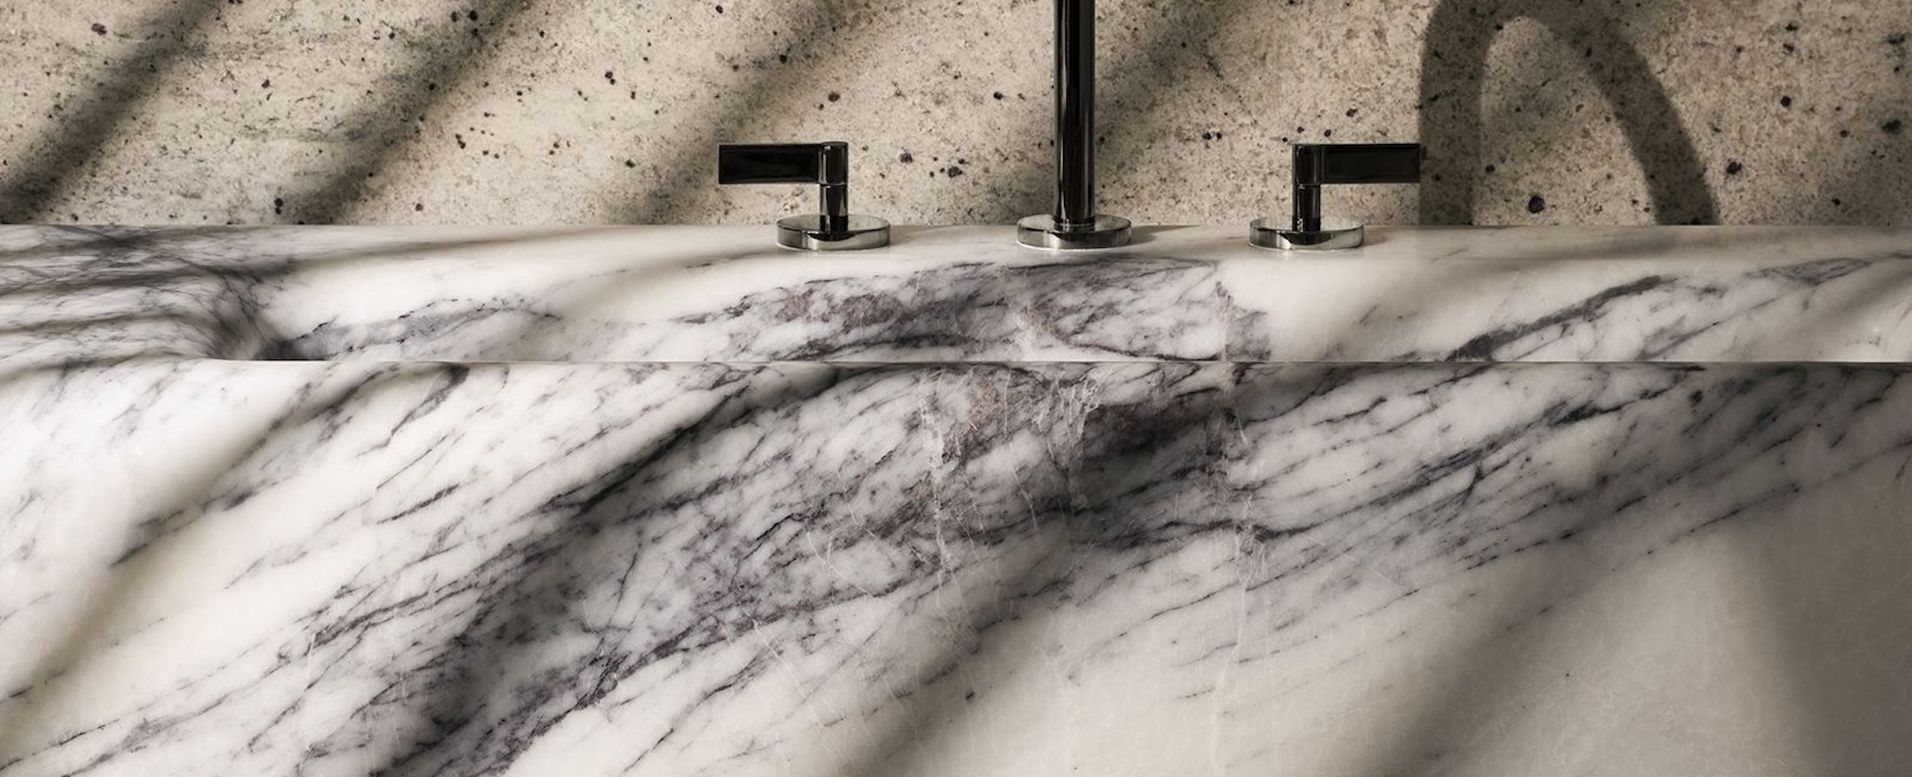 MAMO | Architectural Stone Surfaces® Banner image